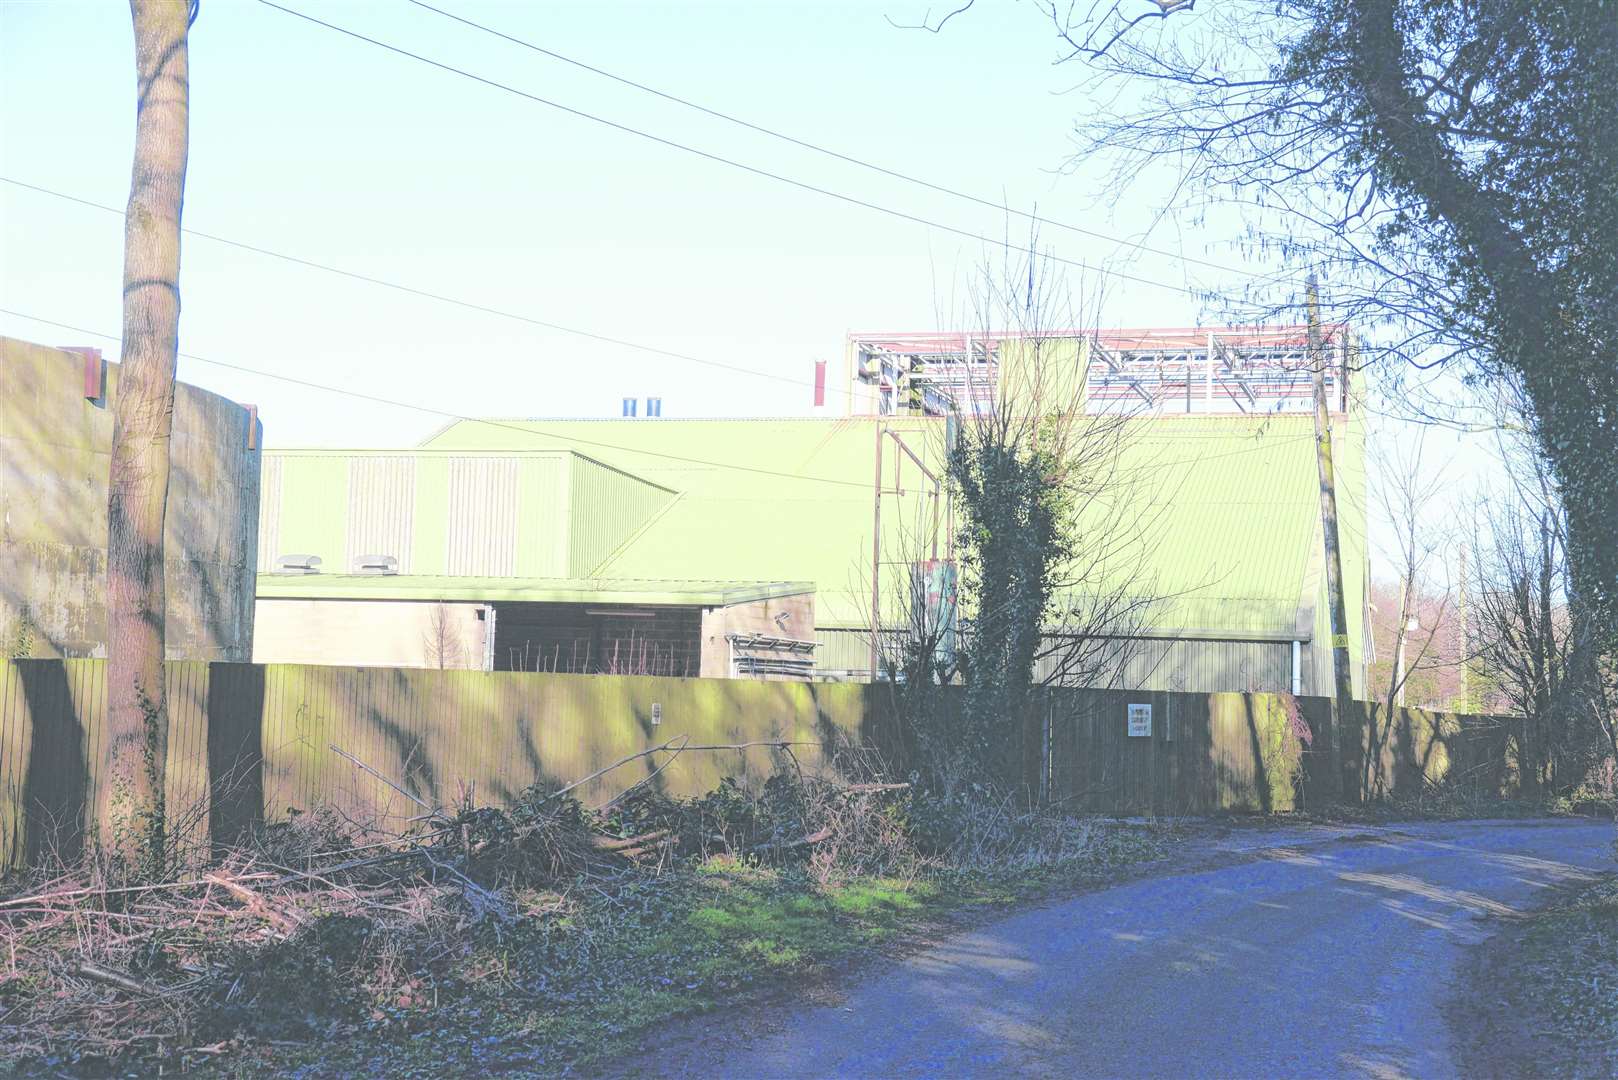 The former Thruxted Mill animal rendering plant in Penny Pot Lane